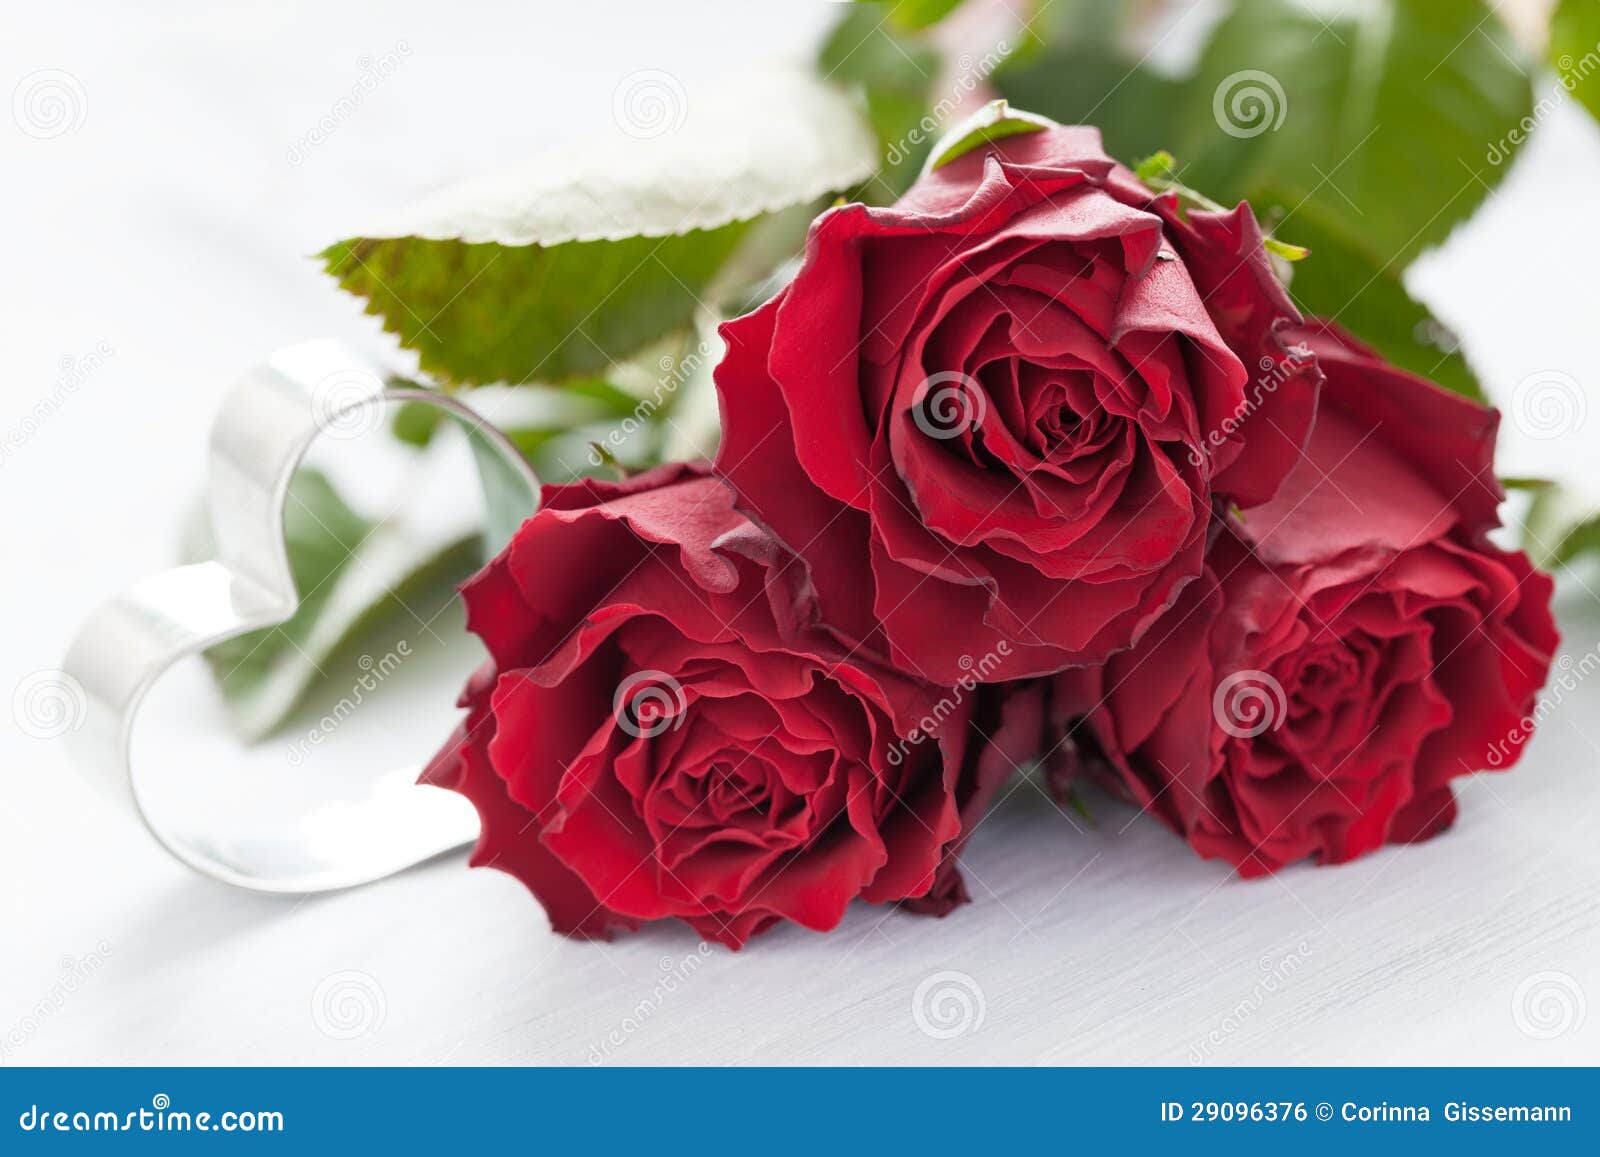 Roses and heart stock photo. Image of celebrate, bouquet - 29096376